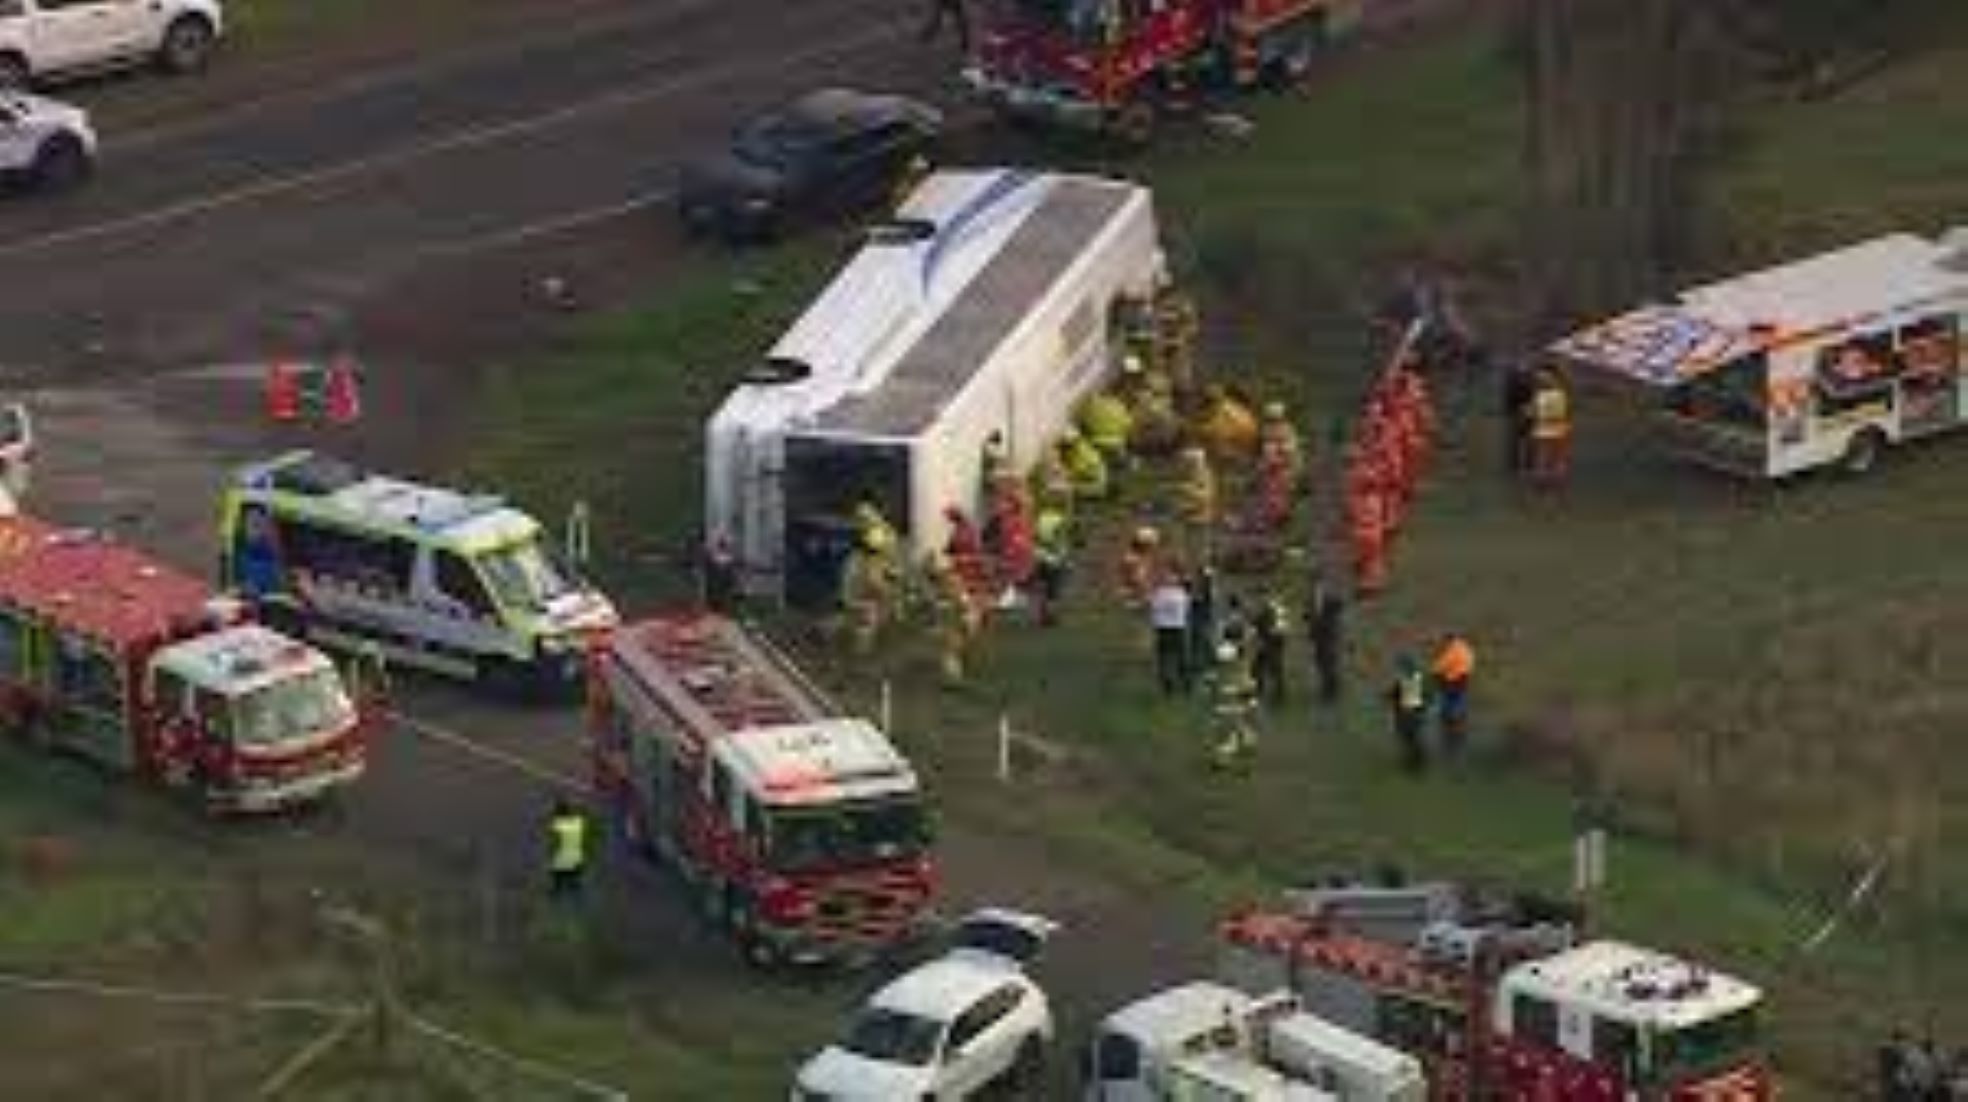 Truck Driver Charged, Children Suffer “Life-Changing” Injures After School Bus Accident In Australia